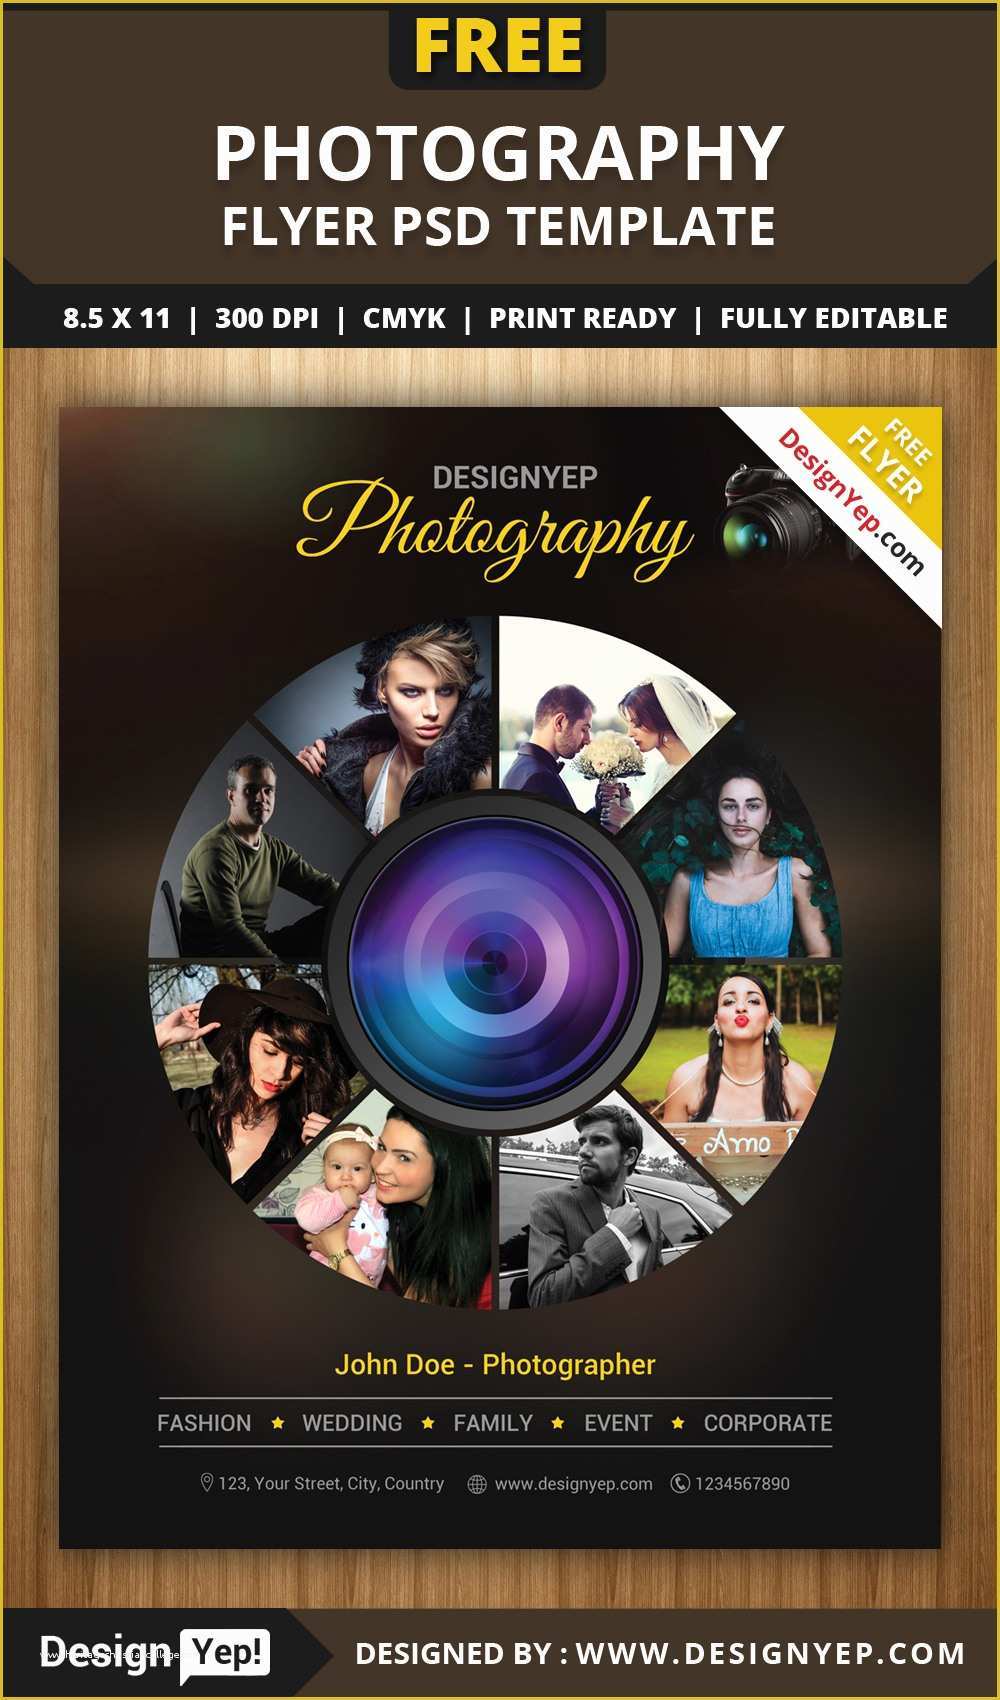 Photography Ad Template Free Of Free Graphy Flyer Psd Templ Ulotki